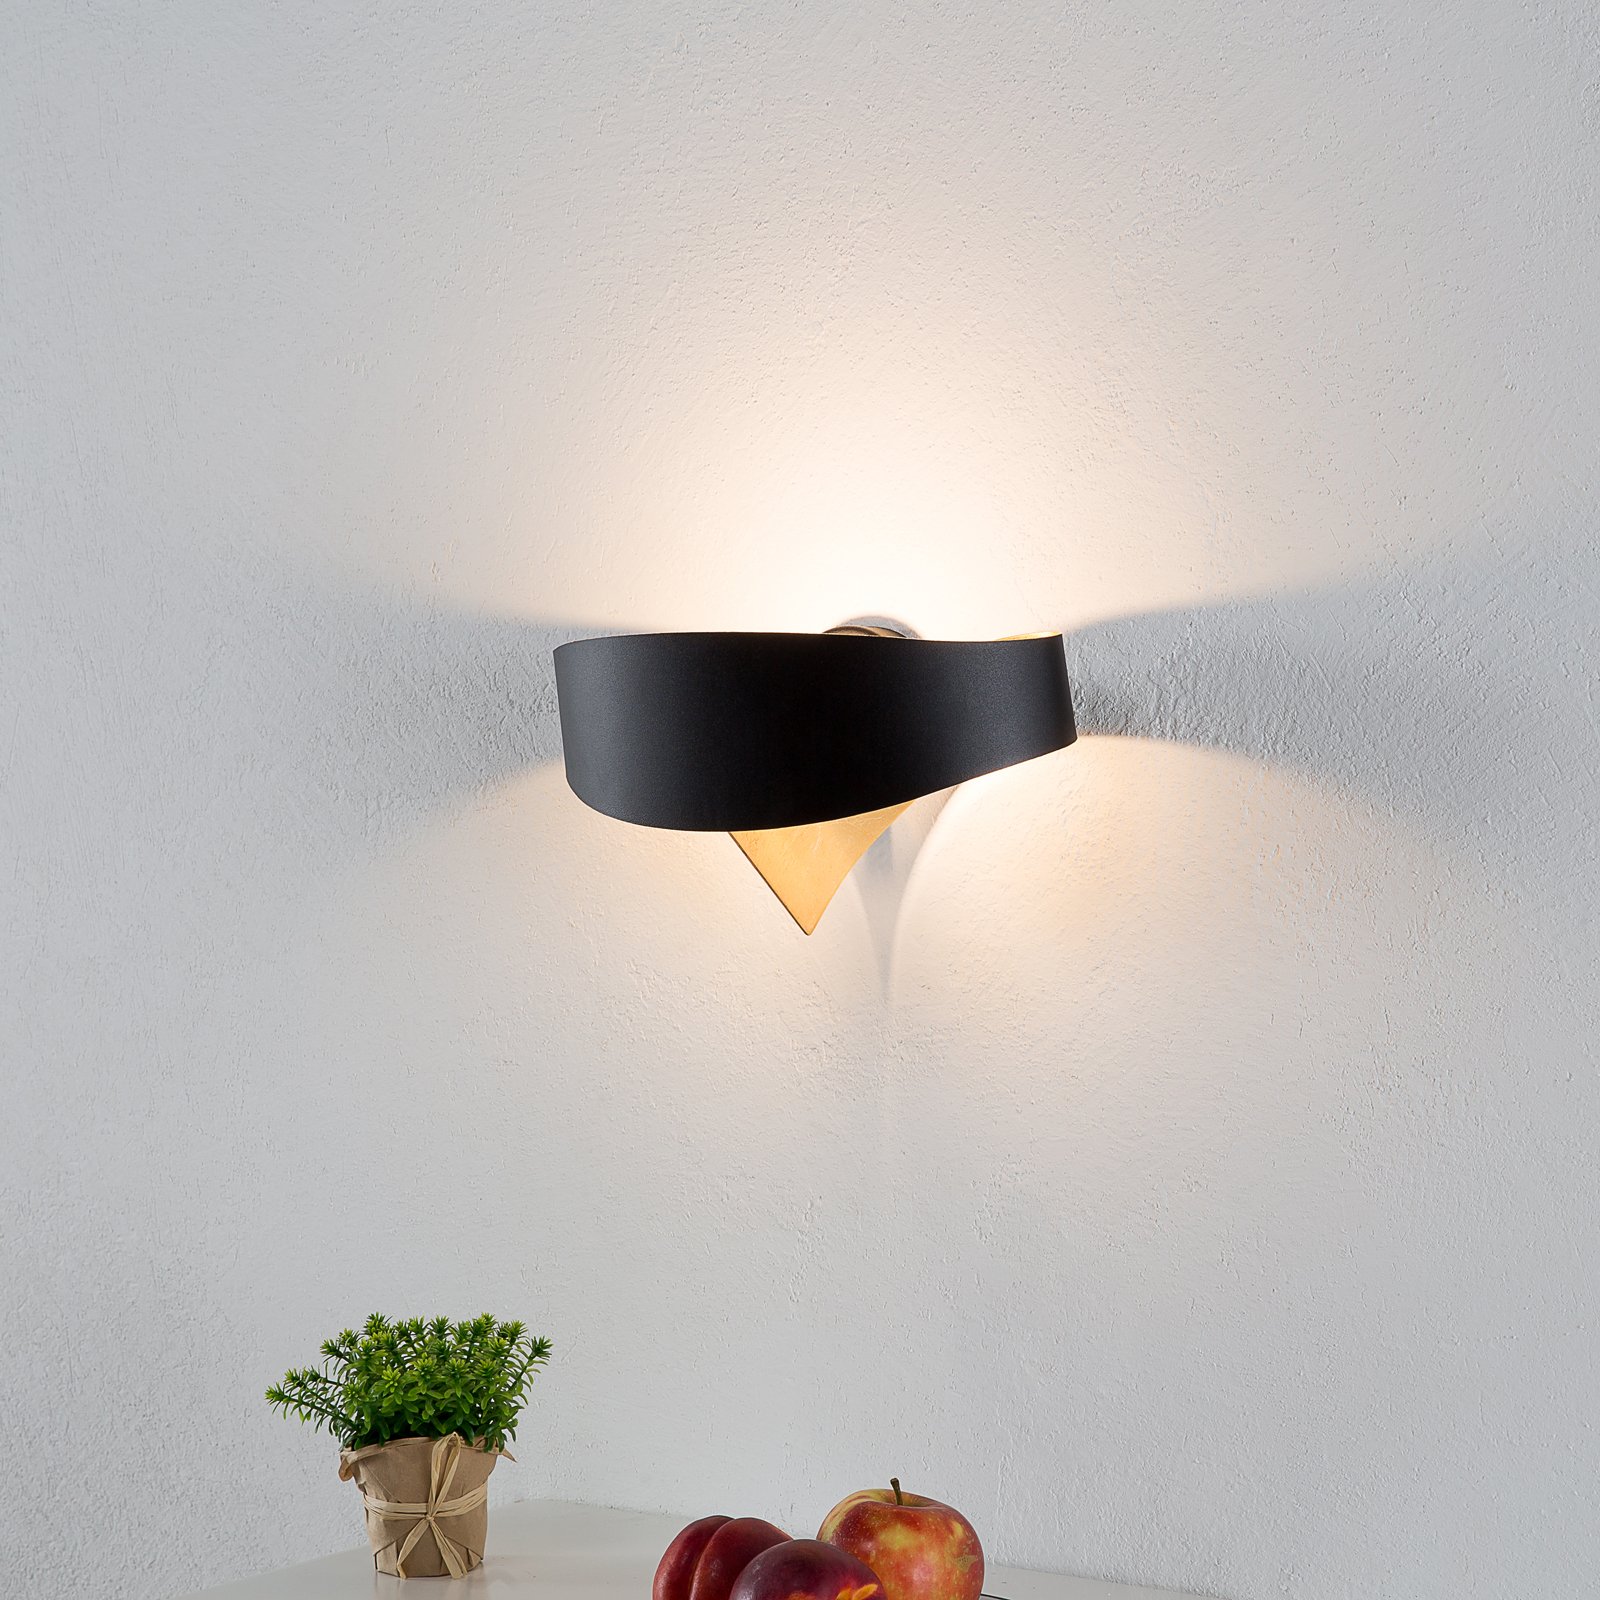 Black and gold designer wall lamp Scudo LED